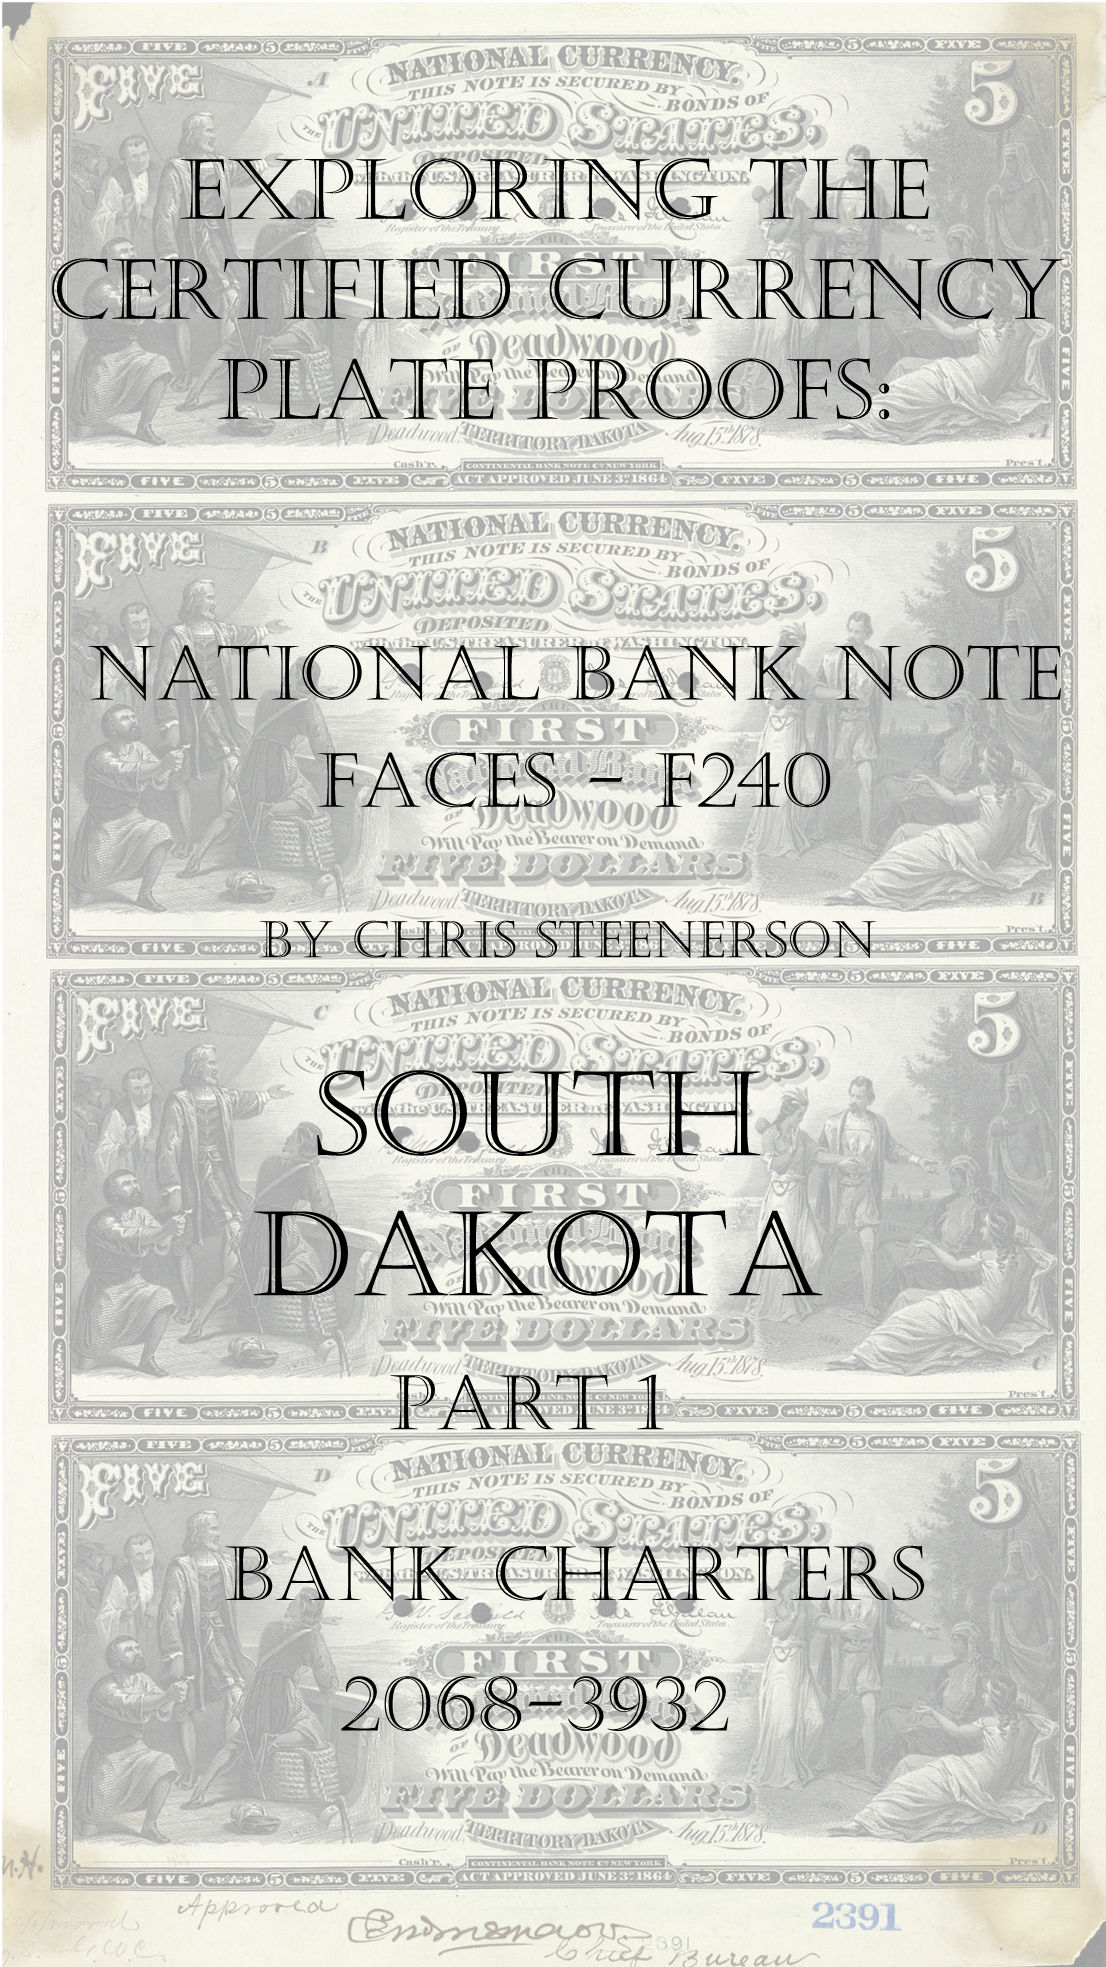 South Dakota National Bank Note Currency Proofs